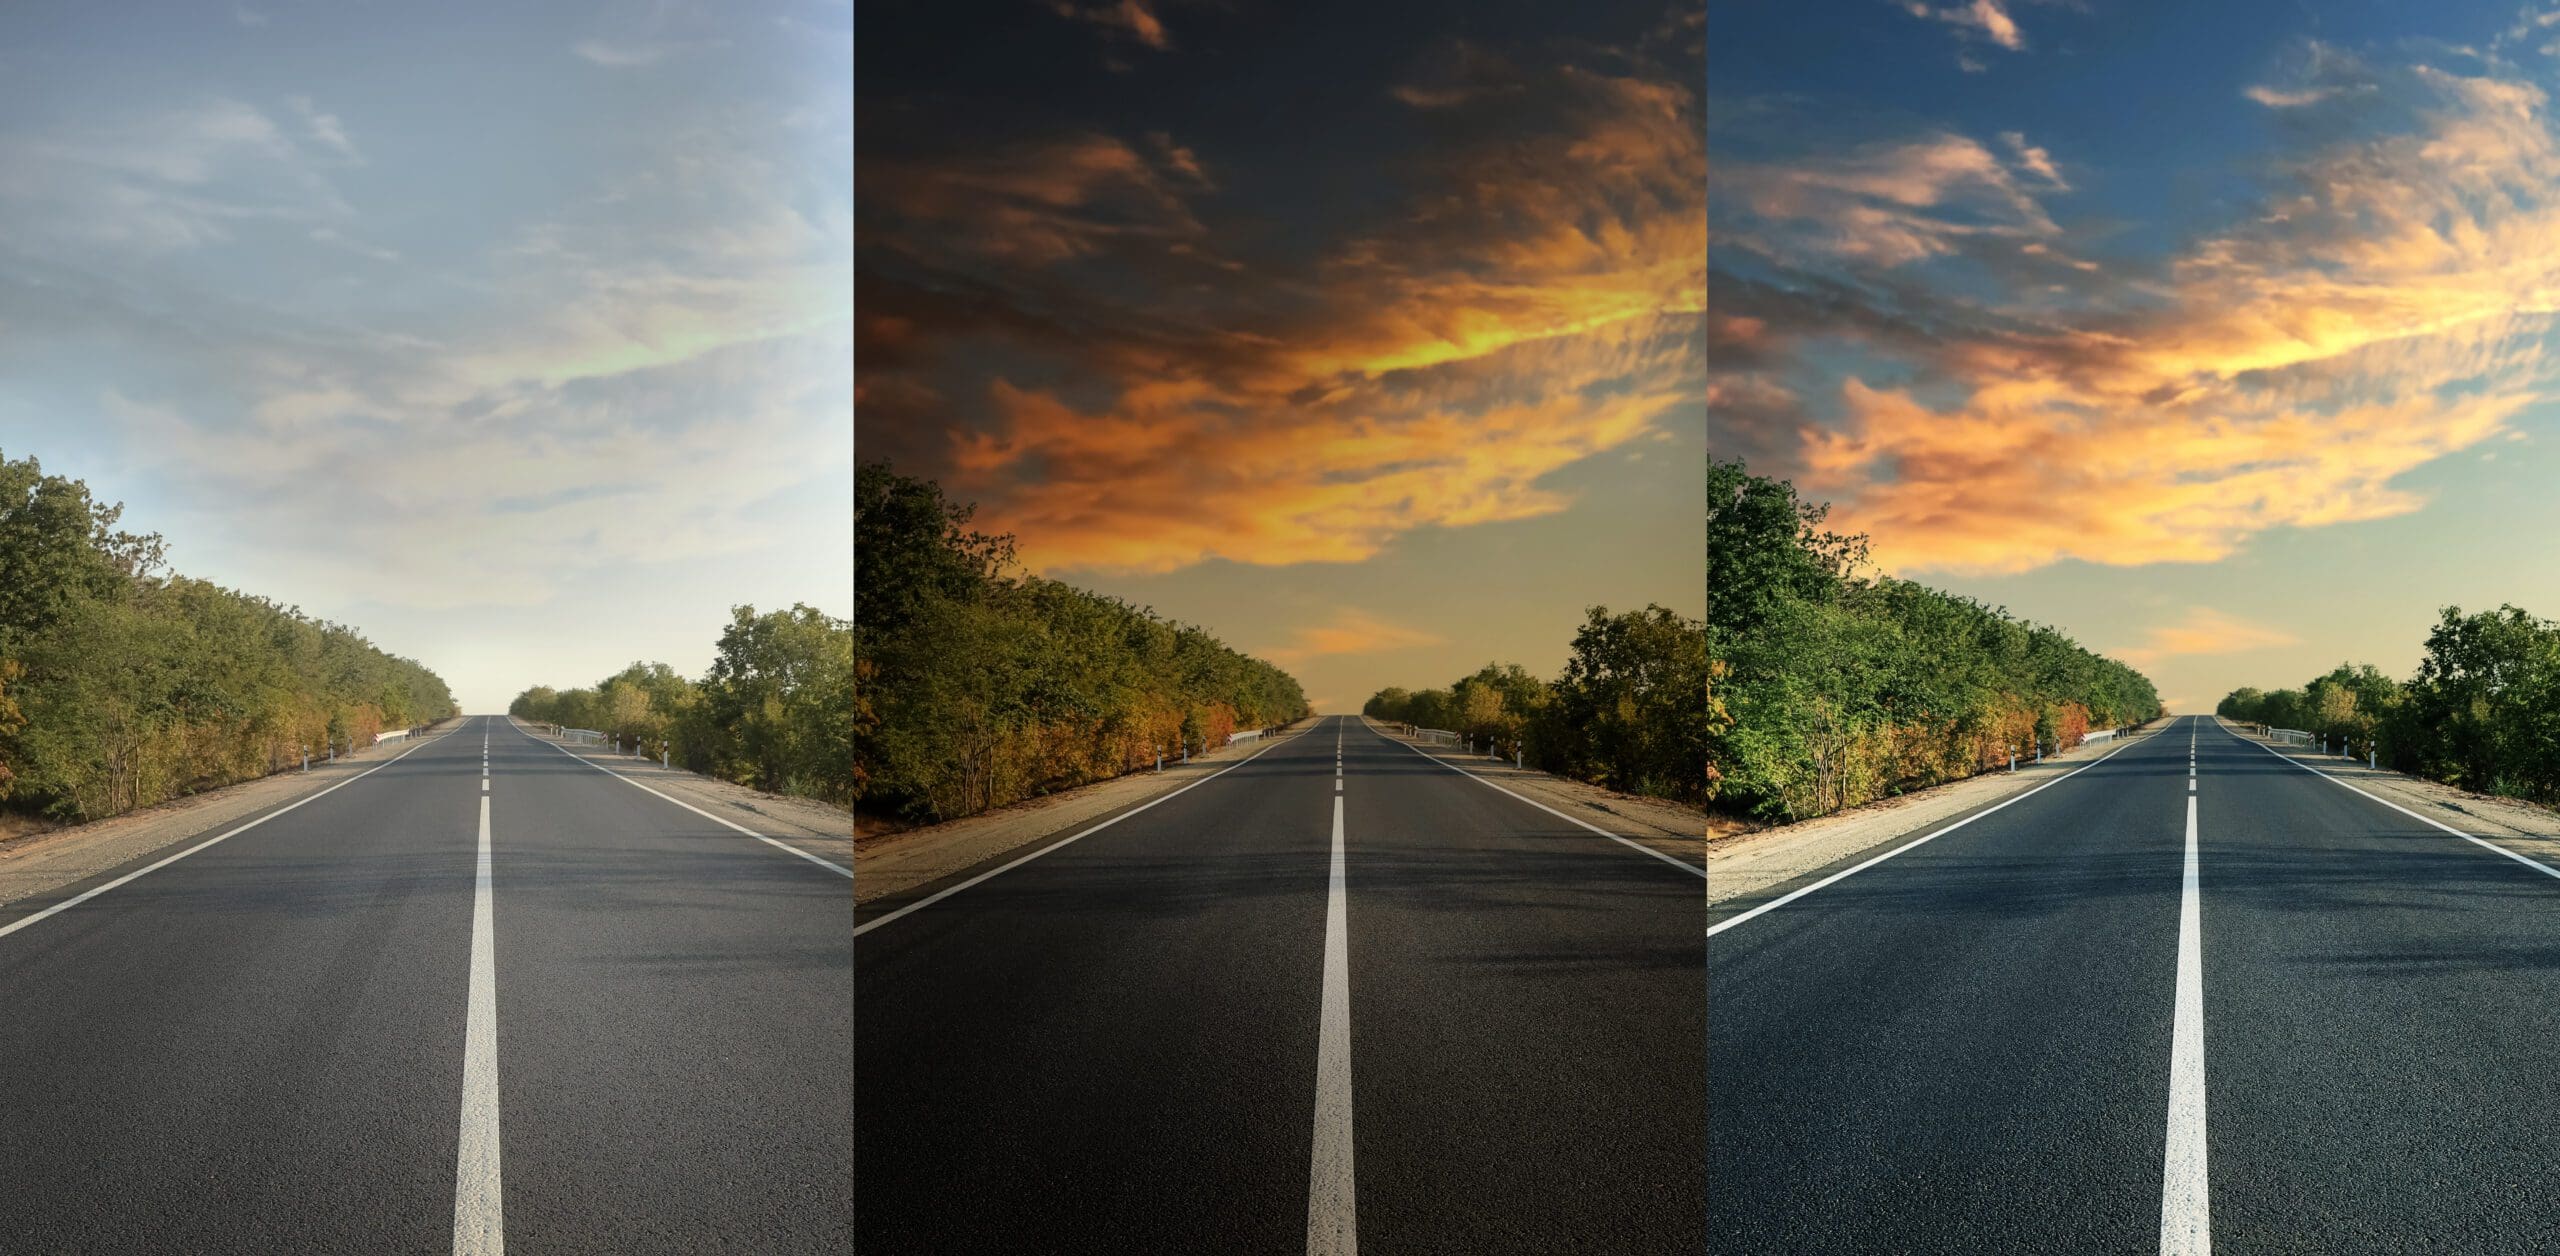 Photos before and after retouch, collage. Beautiful view of empty asphalt highway